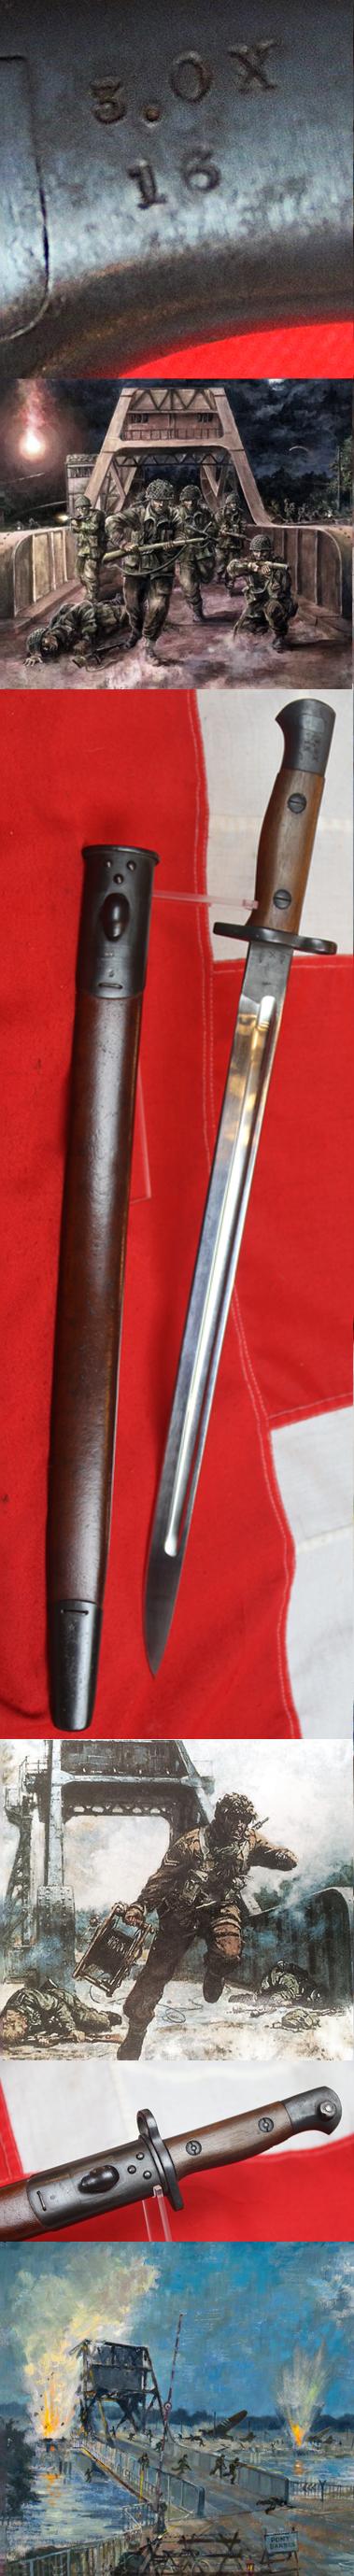 A Simply Fabulous Historical, WW2 SMLE Rifle Sword Bayonet, Sanderson, From One of The Best & Notable Regiments of WW2, The Ox and Bucks, of Pegasus Bridge Fame